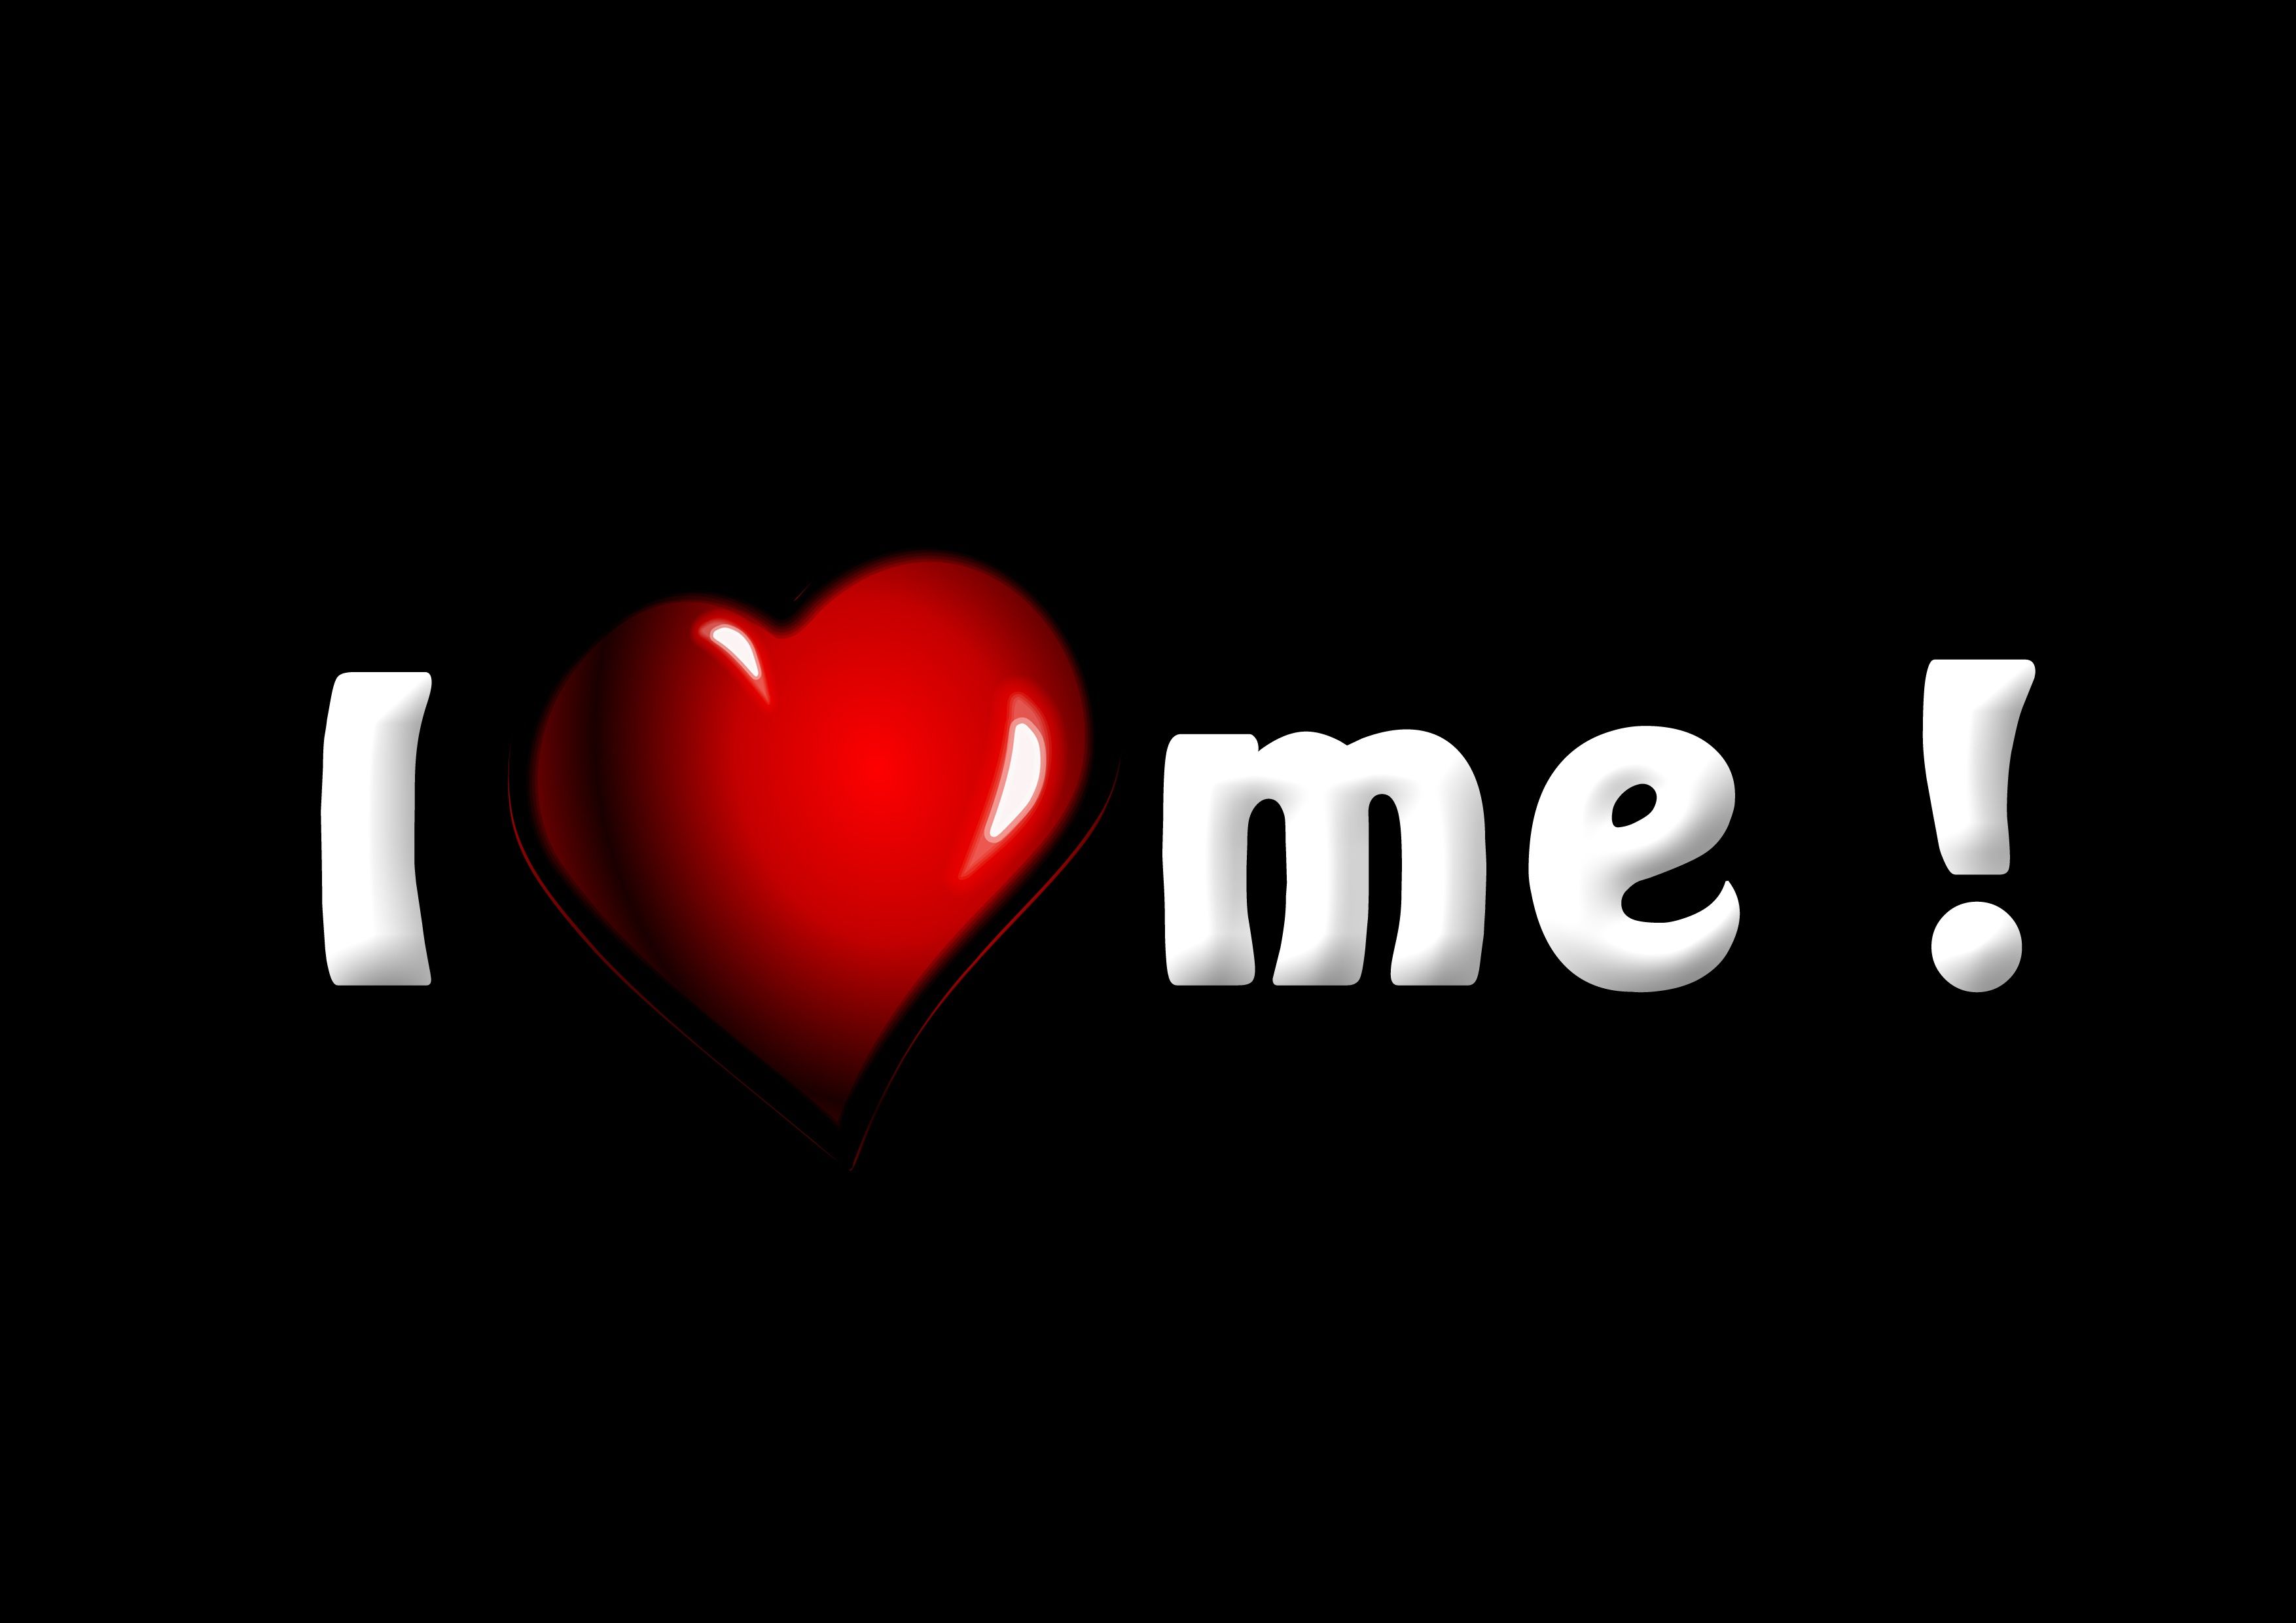 I love myself wallpaper. All HD picture